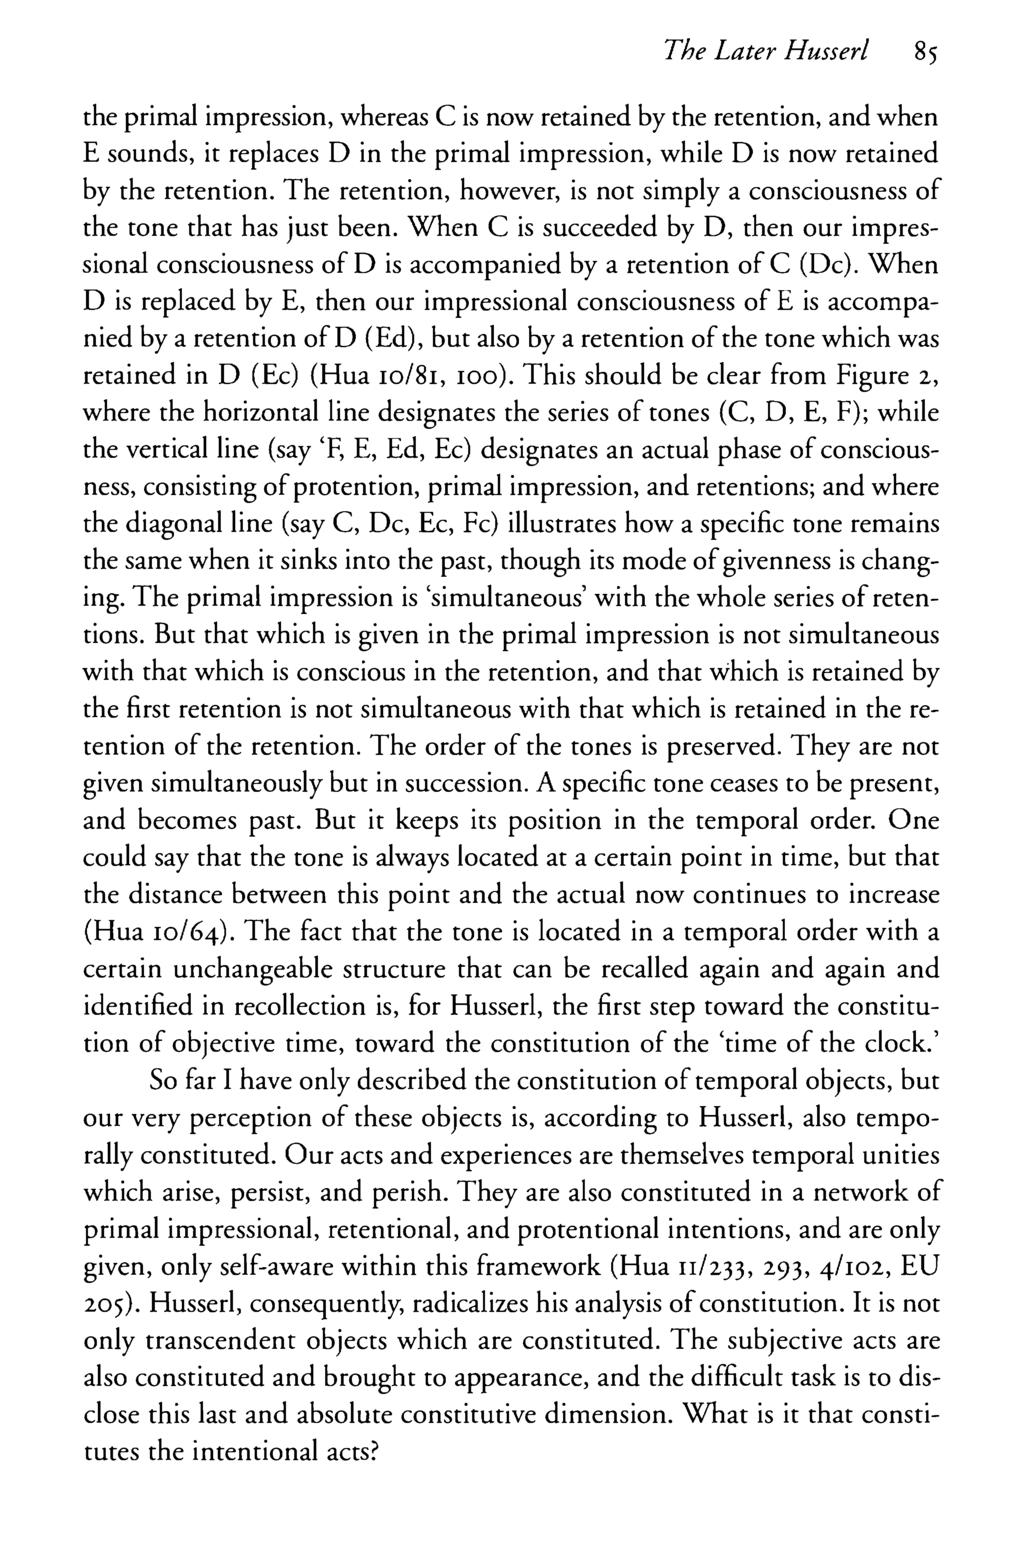 The Later Husserl 85 the primal impression, whereas C is now retained by the retention, and when E sounds, it replaces D in the primal impression, while D is now retained by the retention.